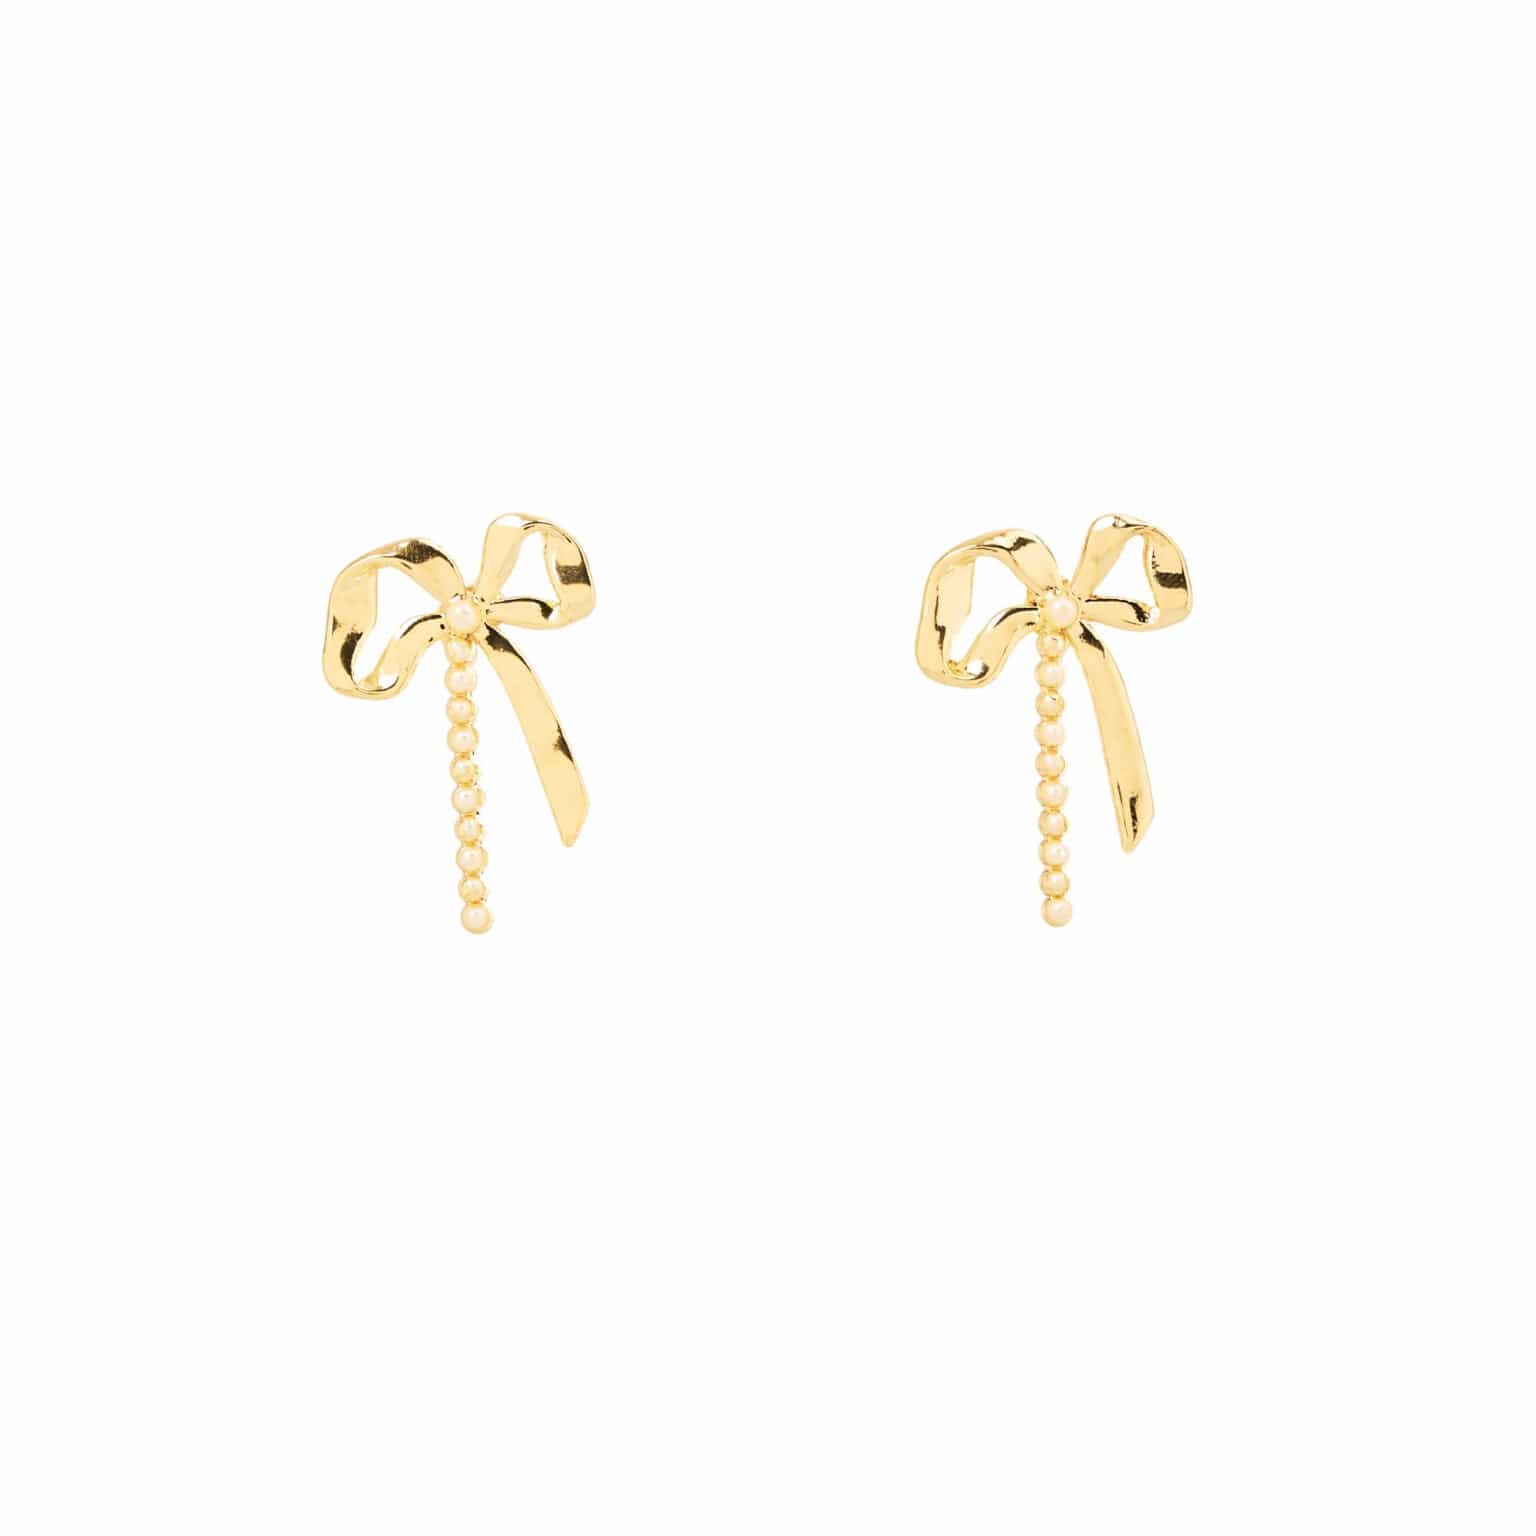 Bow Knot Stud Earring by Mathe Jewellery